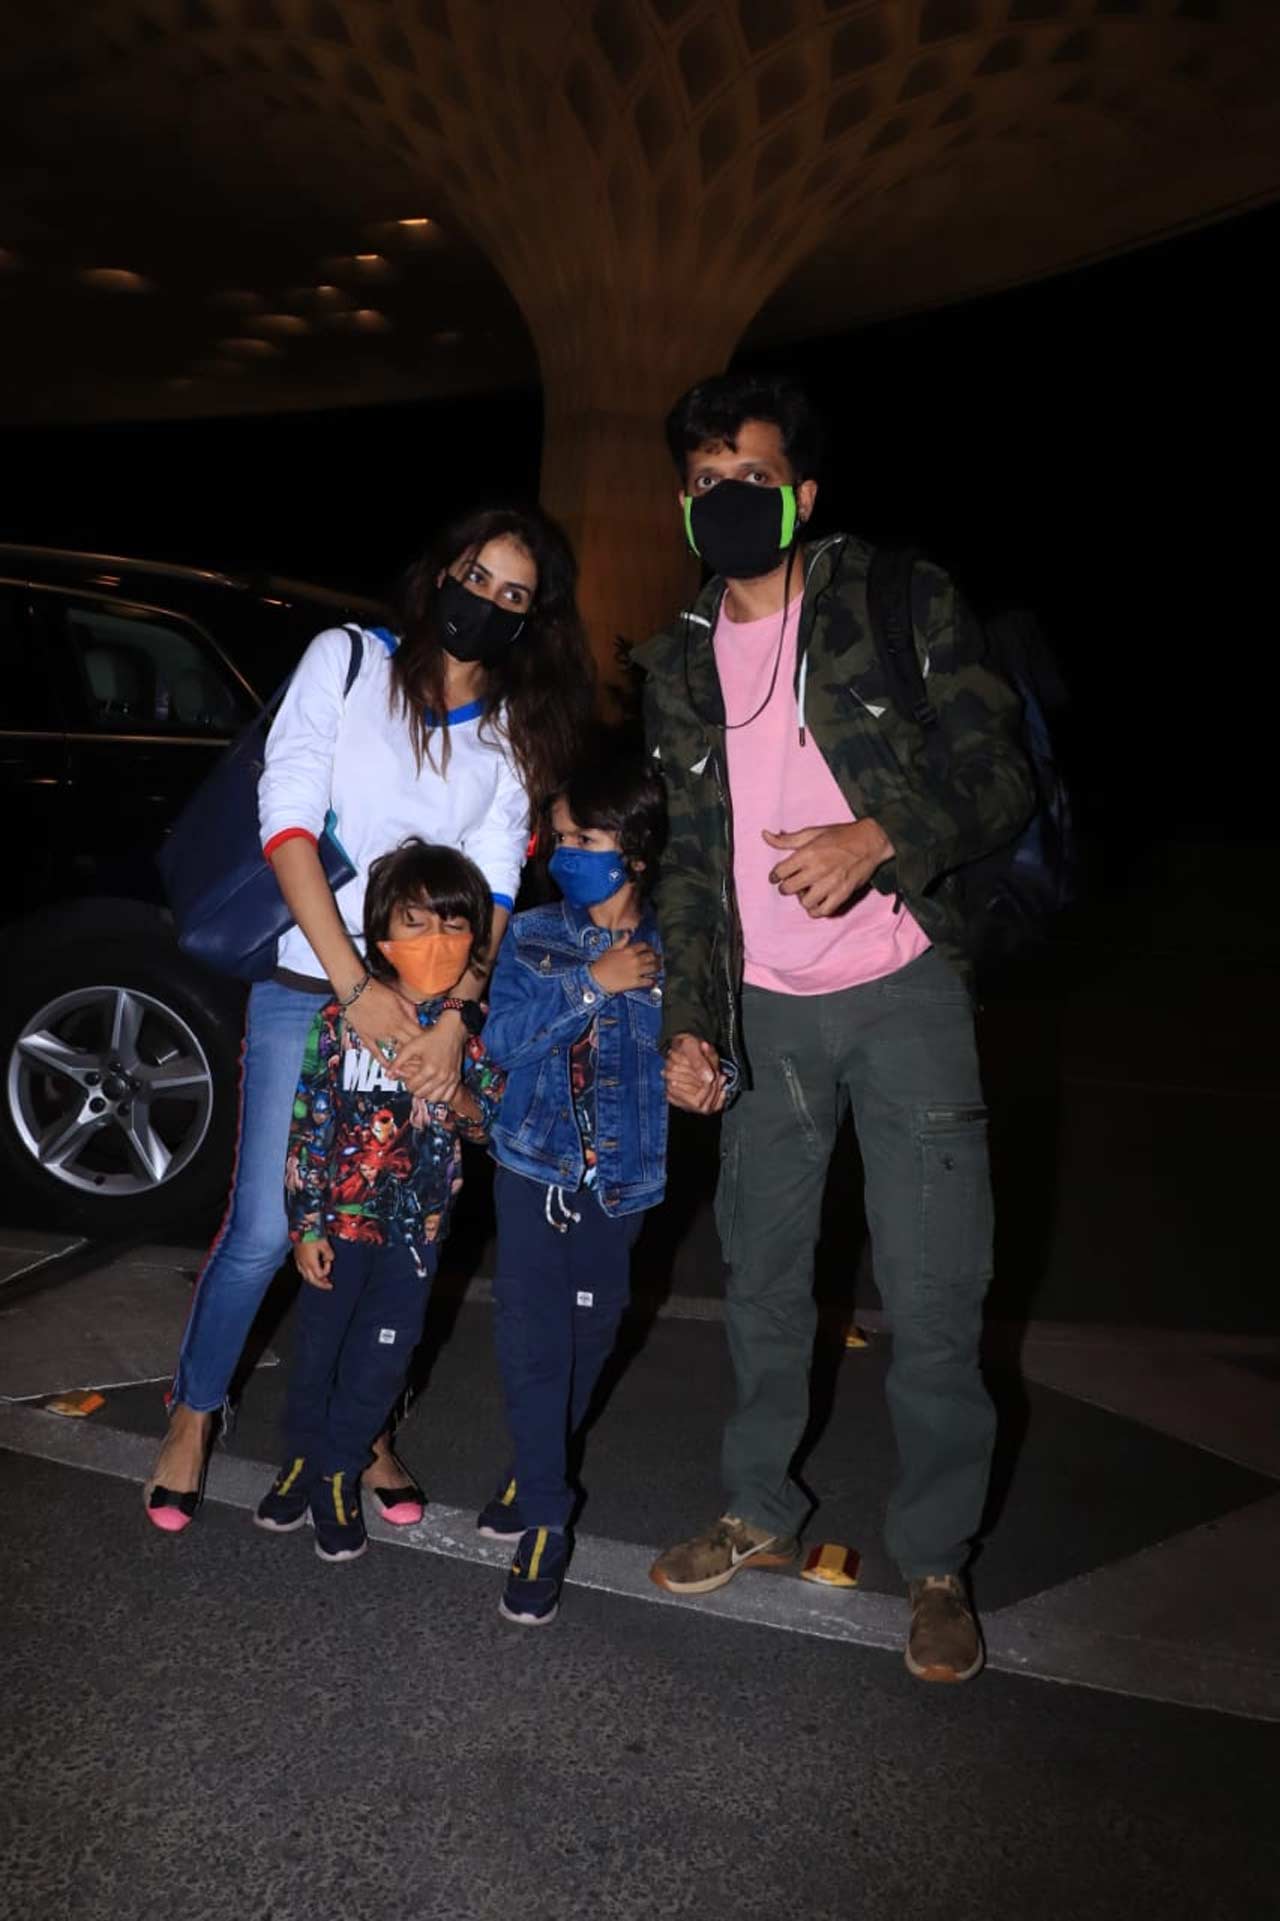 Genelia Deshmukh, Riteish Deshmukh and the kids were also snapped at the Mumbai airport. It seems like the Deshmukh family is out on a family vacation as Maharashtra sees a lockdown for 15 days.